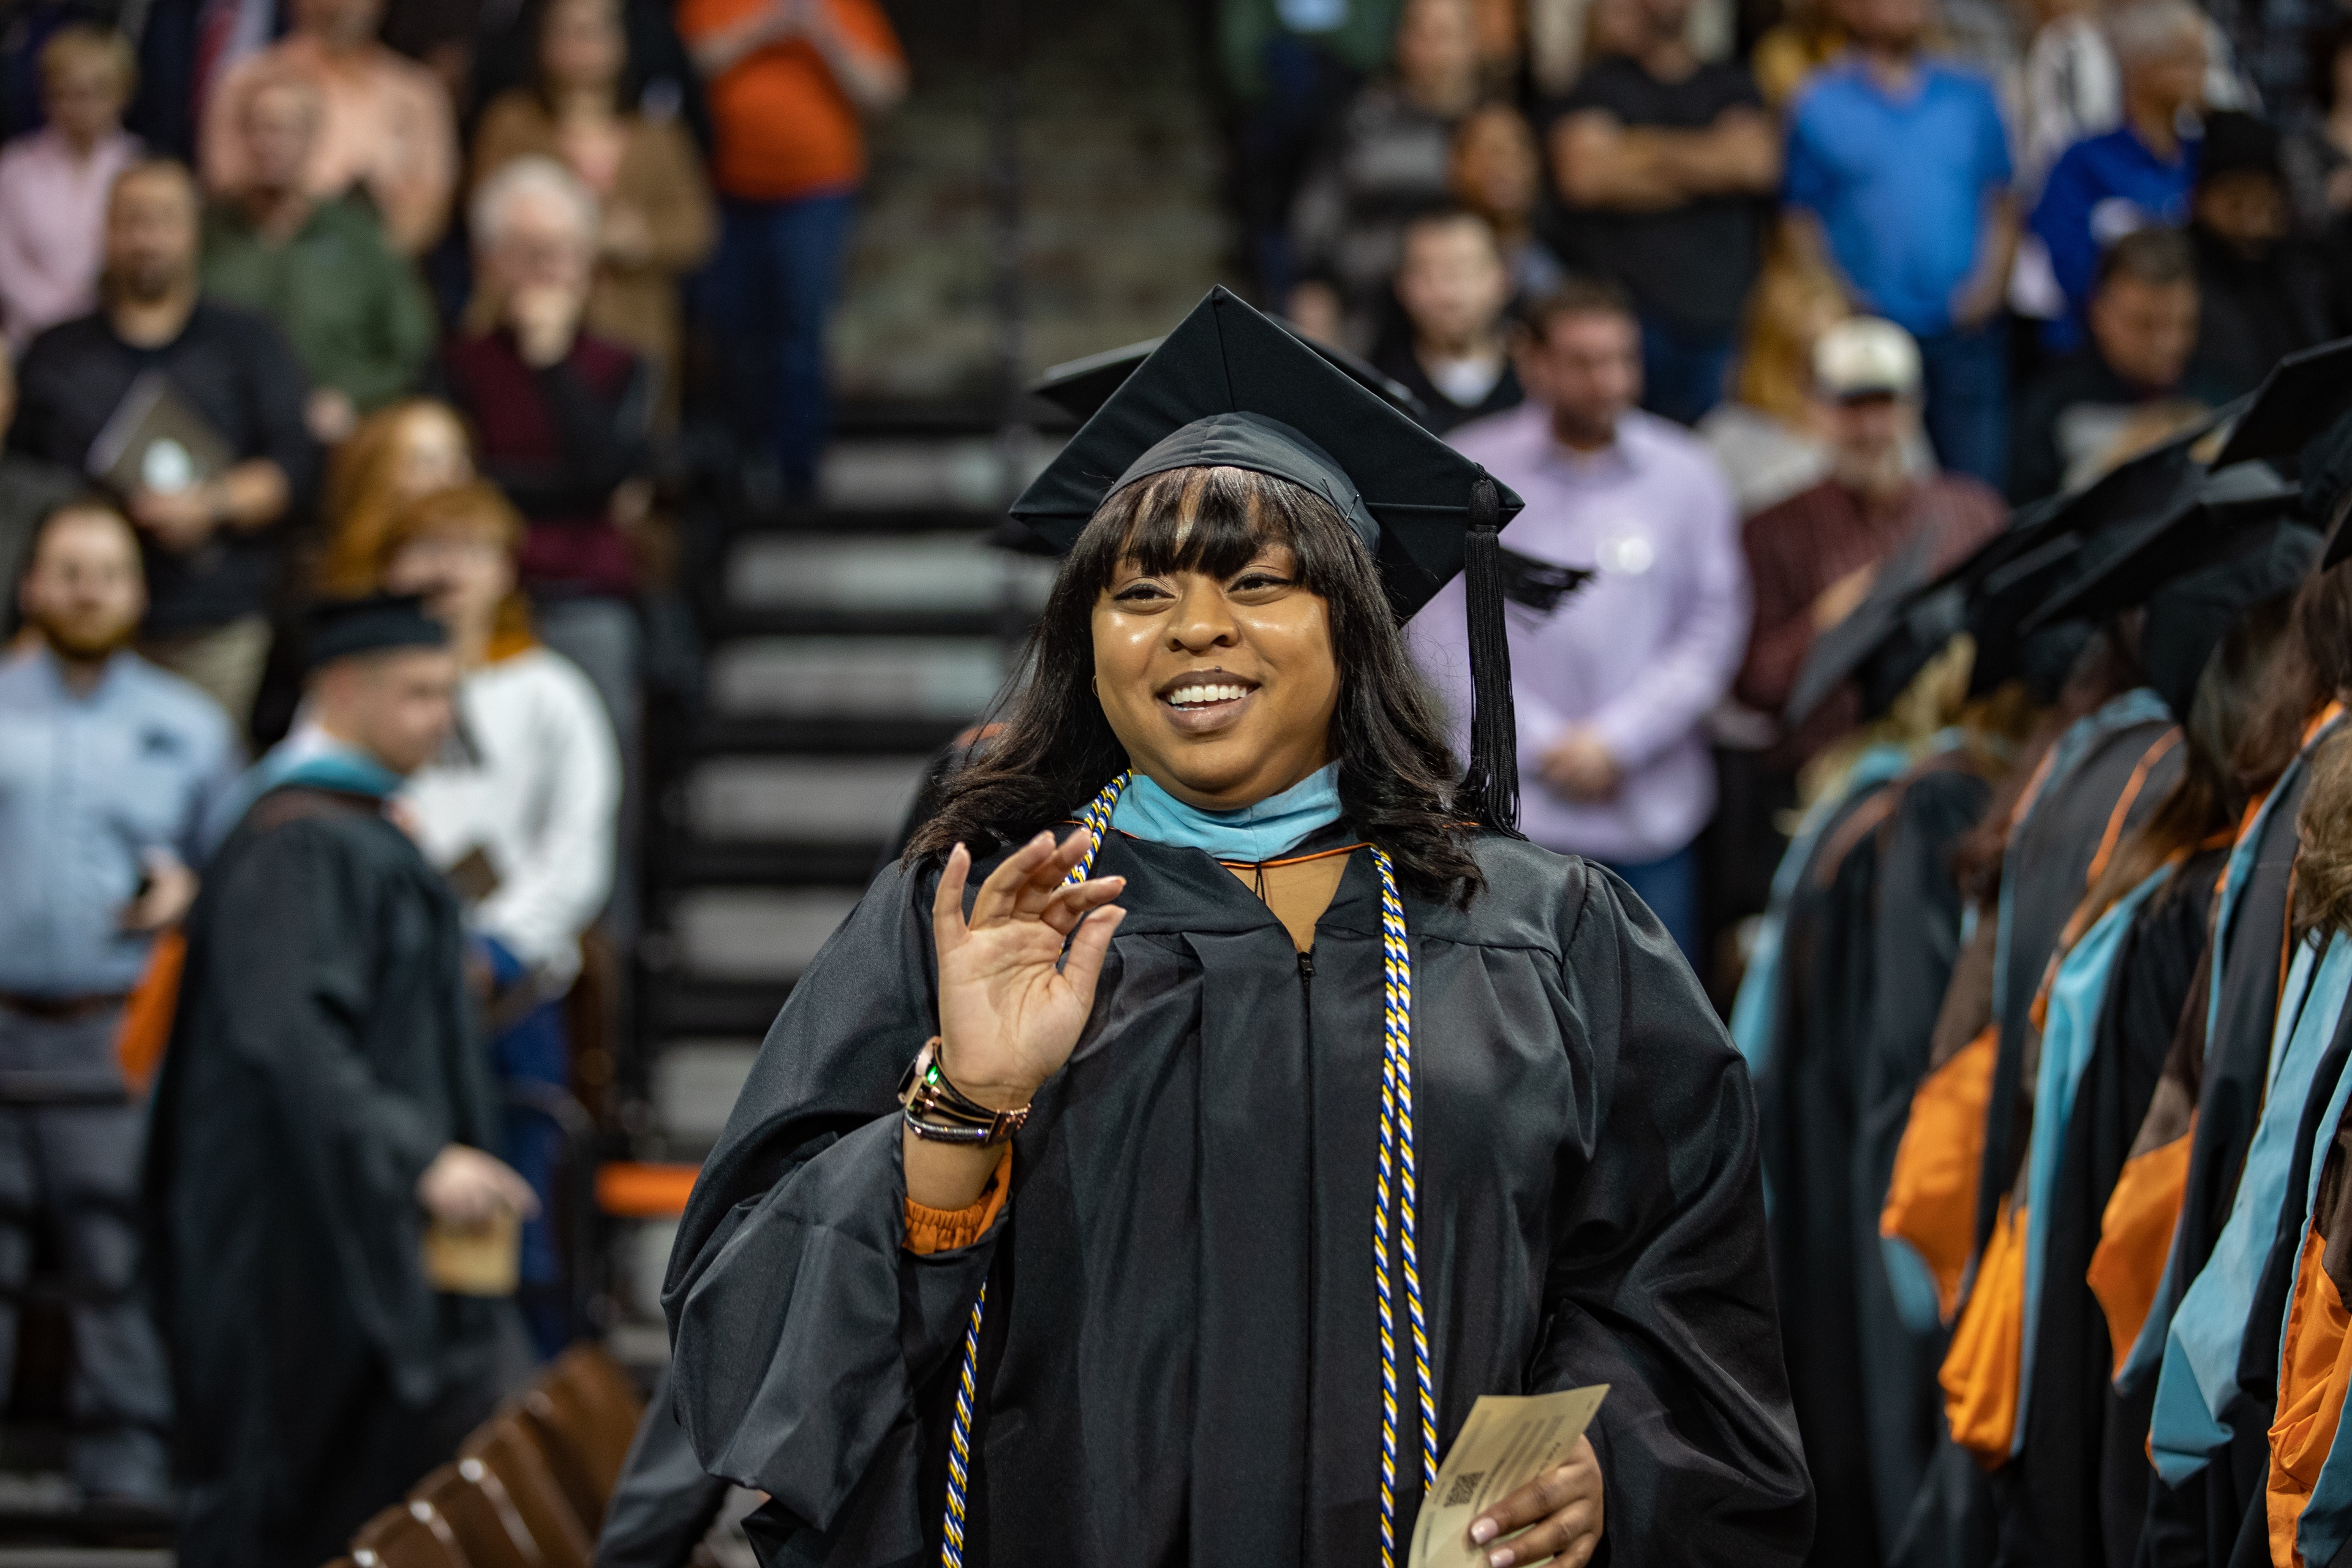 BGSU graduate smiles and waves during Commencement